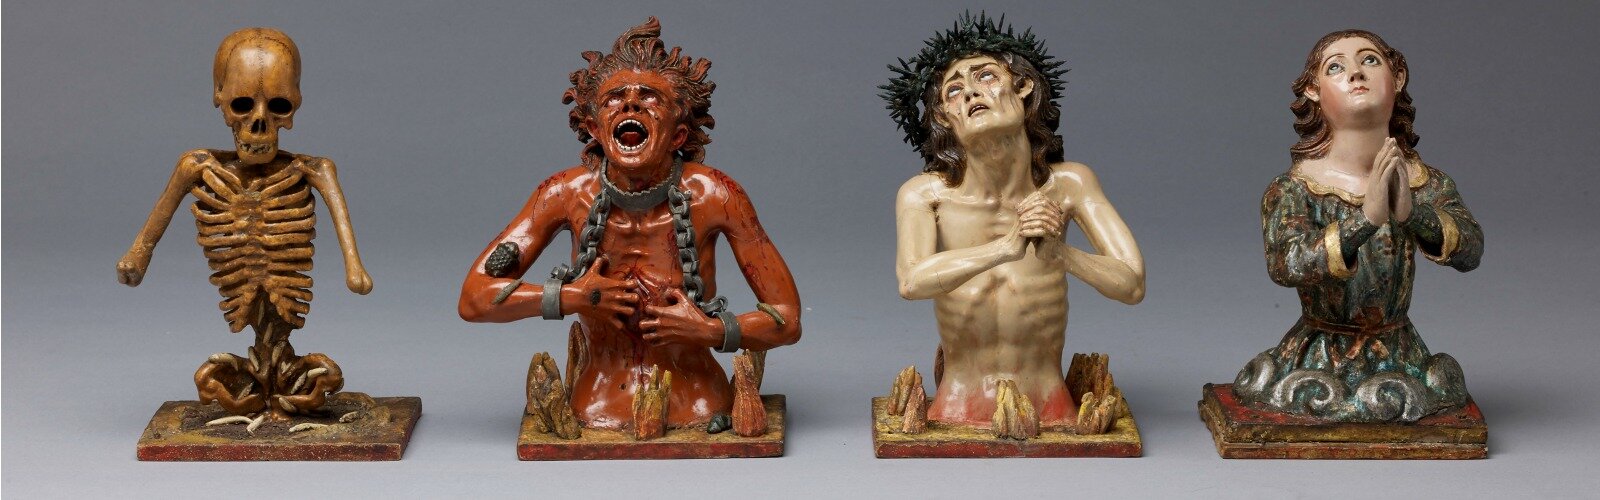 Attributed to Manuel Chili, called Caspicara (circa 1723–1796), Ecuador, "The Four Fates of Man: Death, Hell, Purgatory and Heaven," circa 1775, polychromed wood, glass and metal, Courtesy of The Hispanic Society of America, New York.